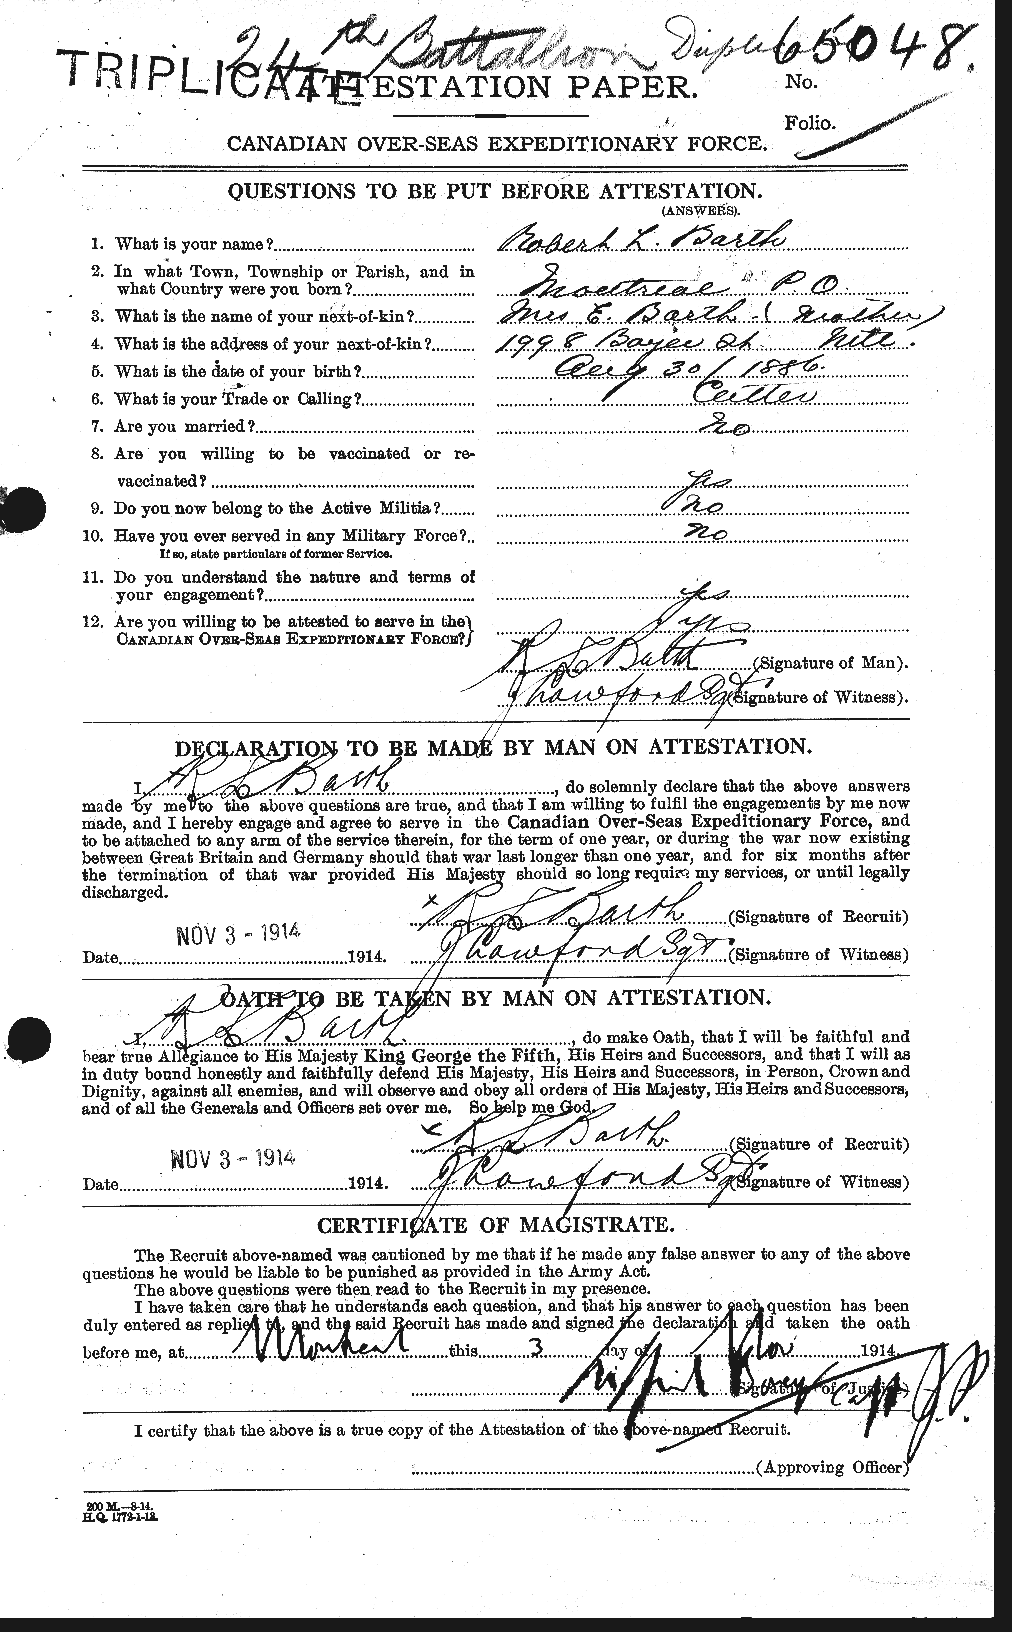 Personnel Records of the First World War - CEF 229071a